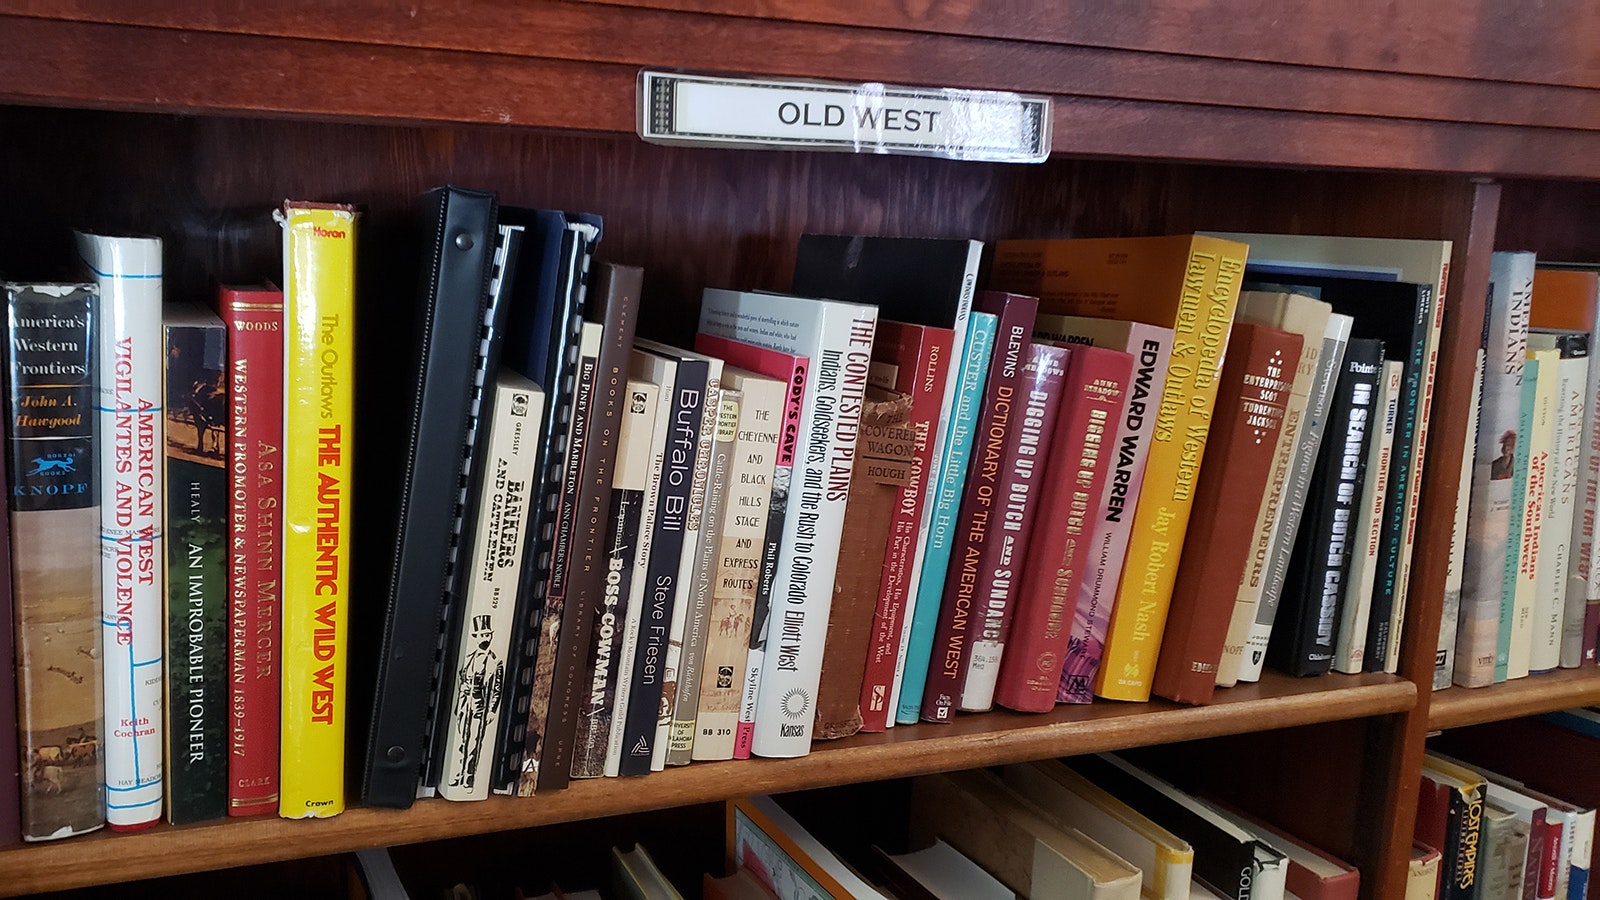 Books about the Old West are particularly popular in the Occidental's library.